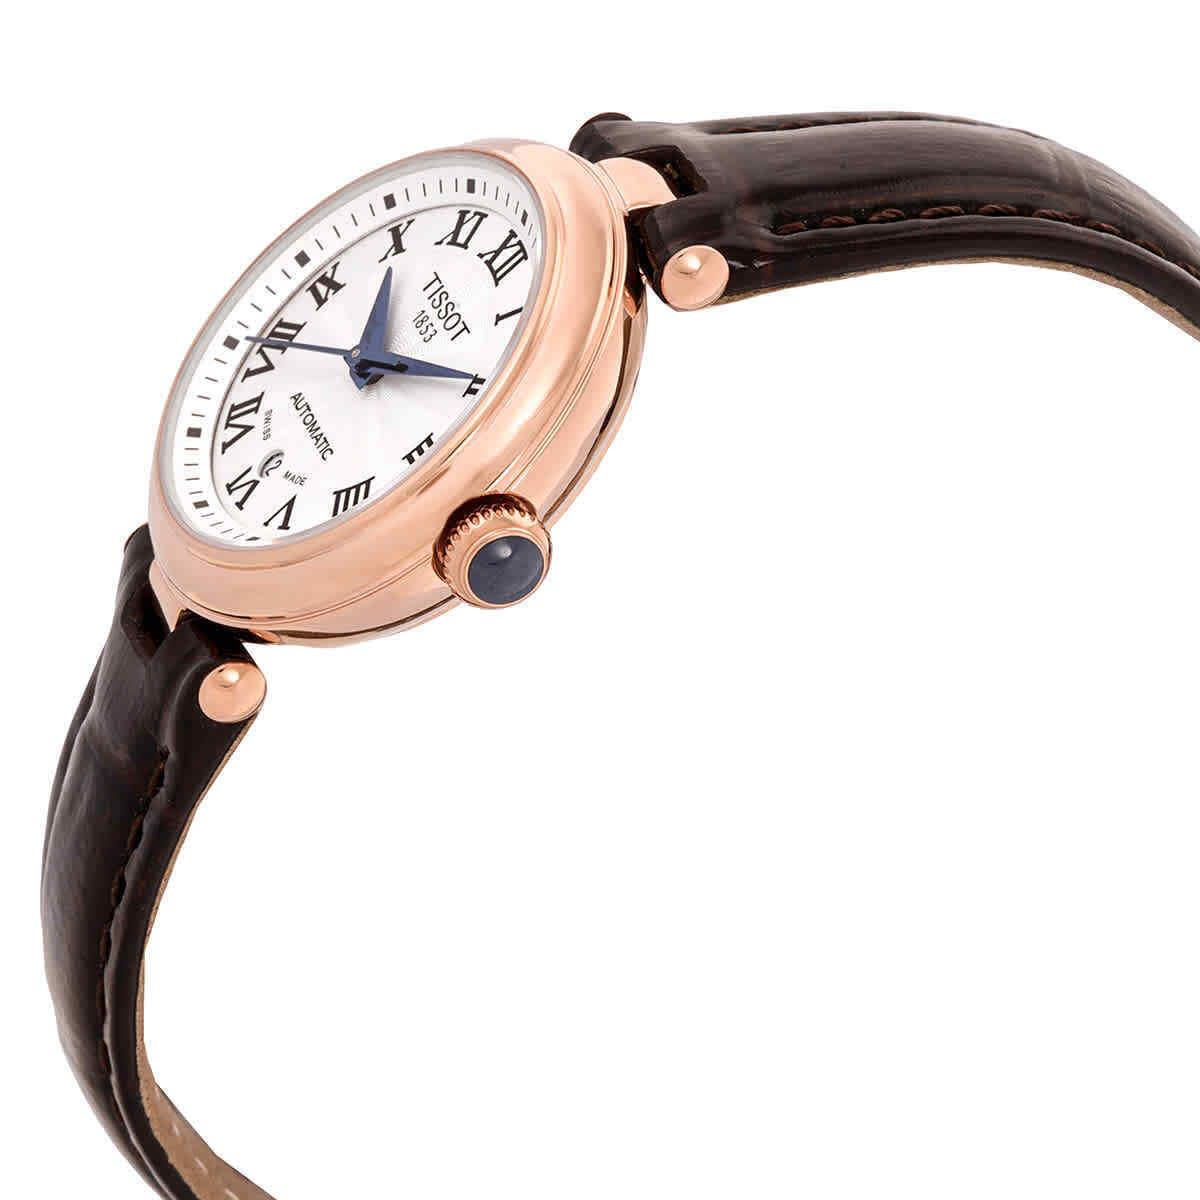 Tissot Bellissima Automatic White Dial Ladies Watch T1262073601300 - Dial: White, Band: Brown, Bezel: Pink